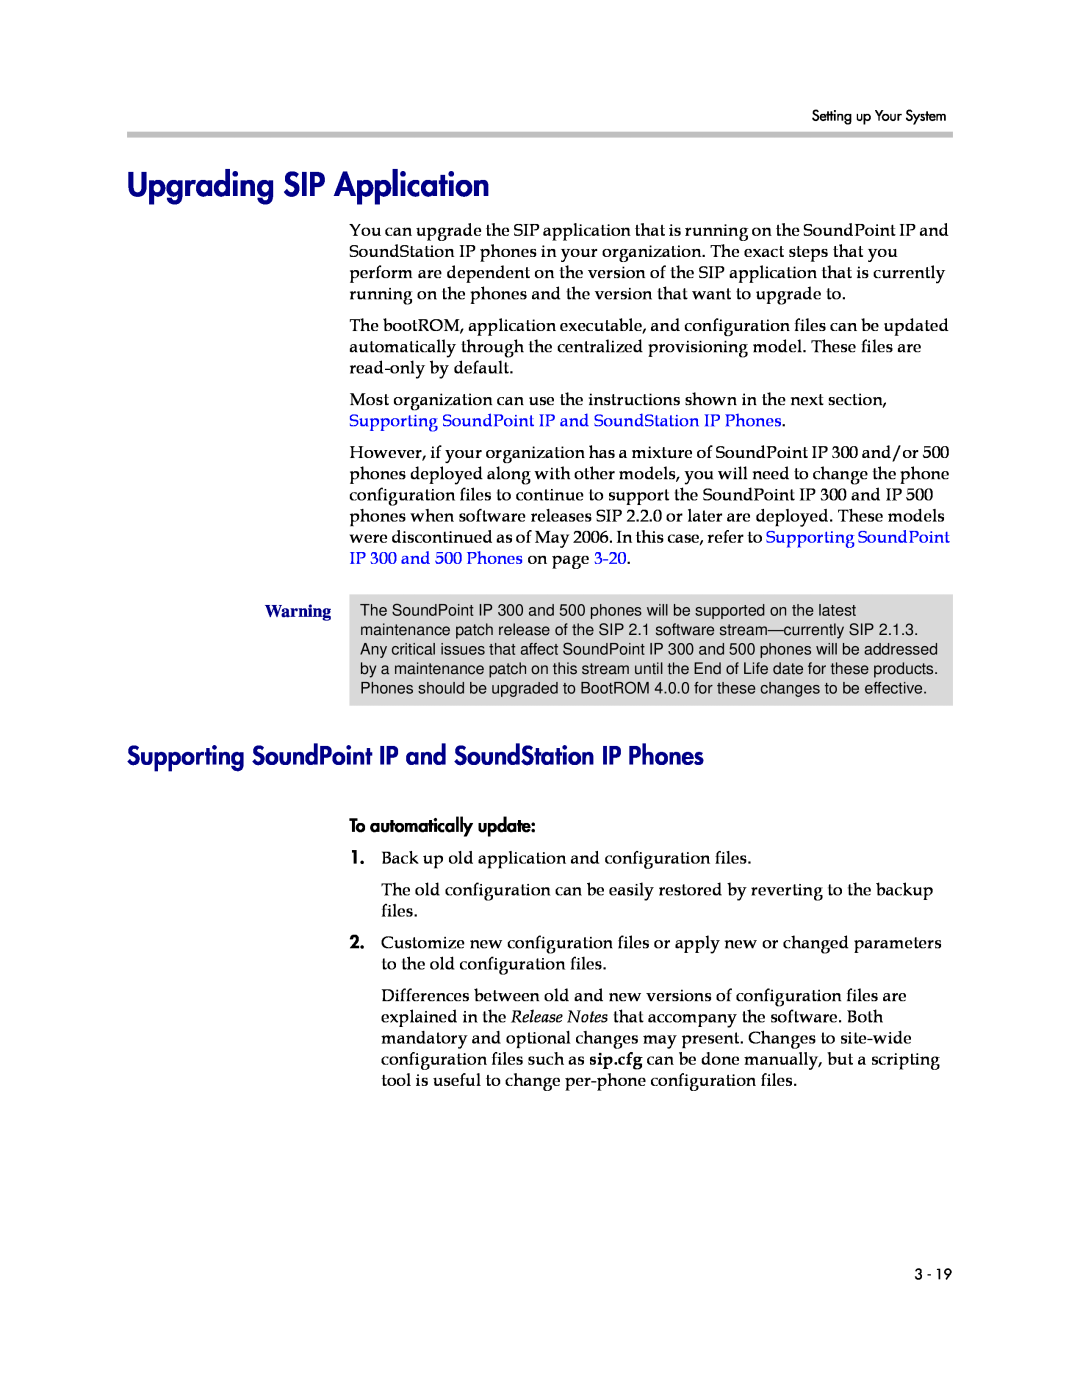 Polycom SIP 3.1 manual Upgrading SIP Application, Supporting SoundPoint IP and SoundStation IP Phones 